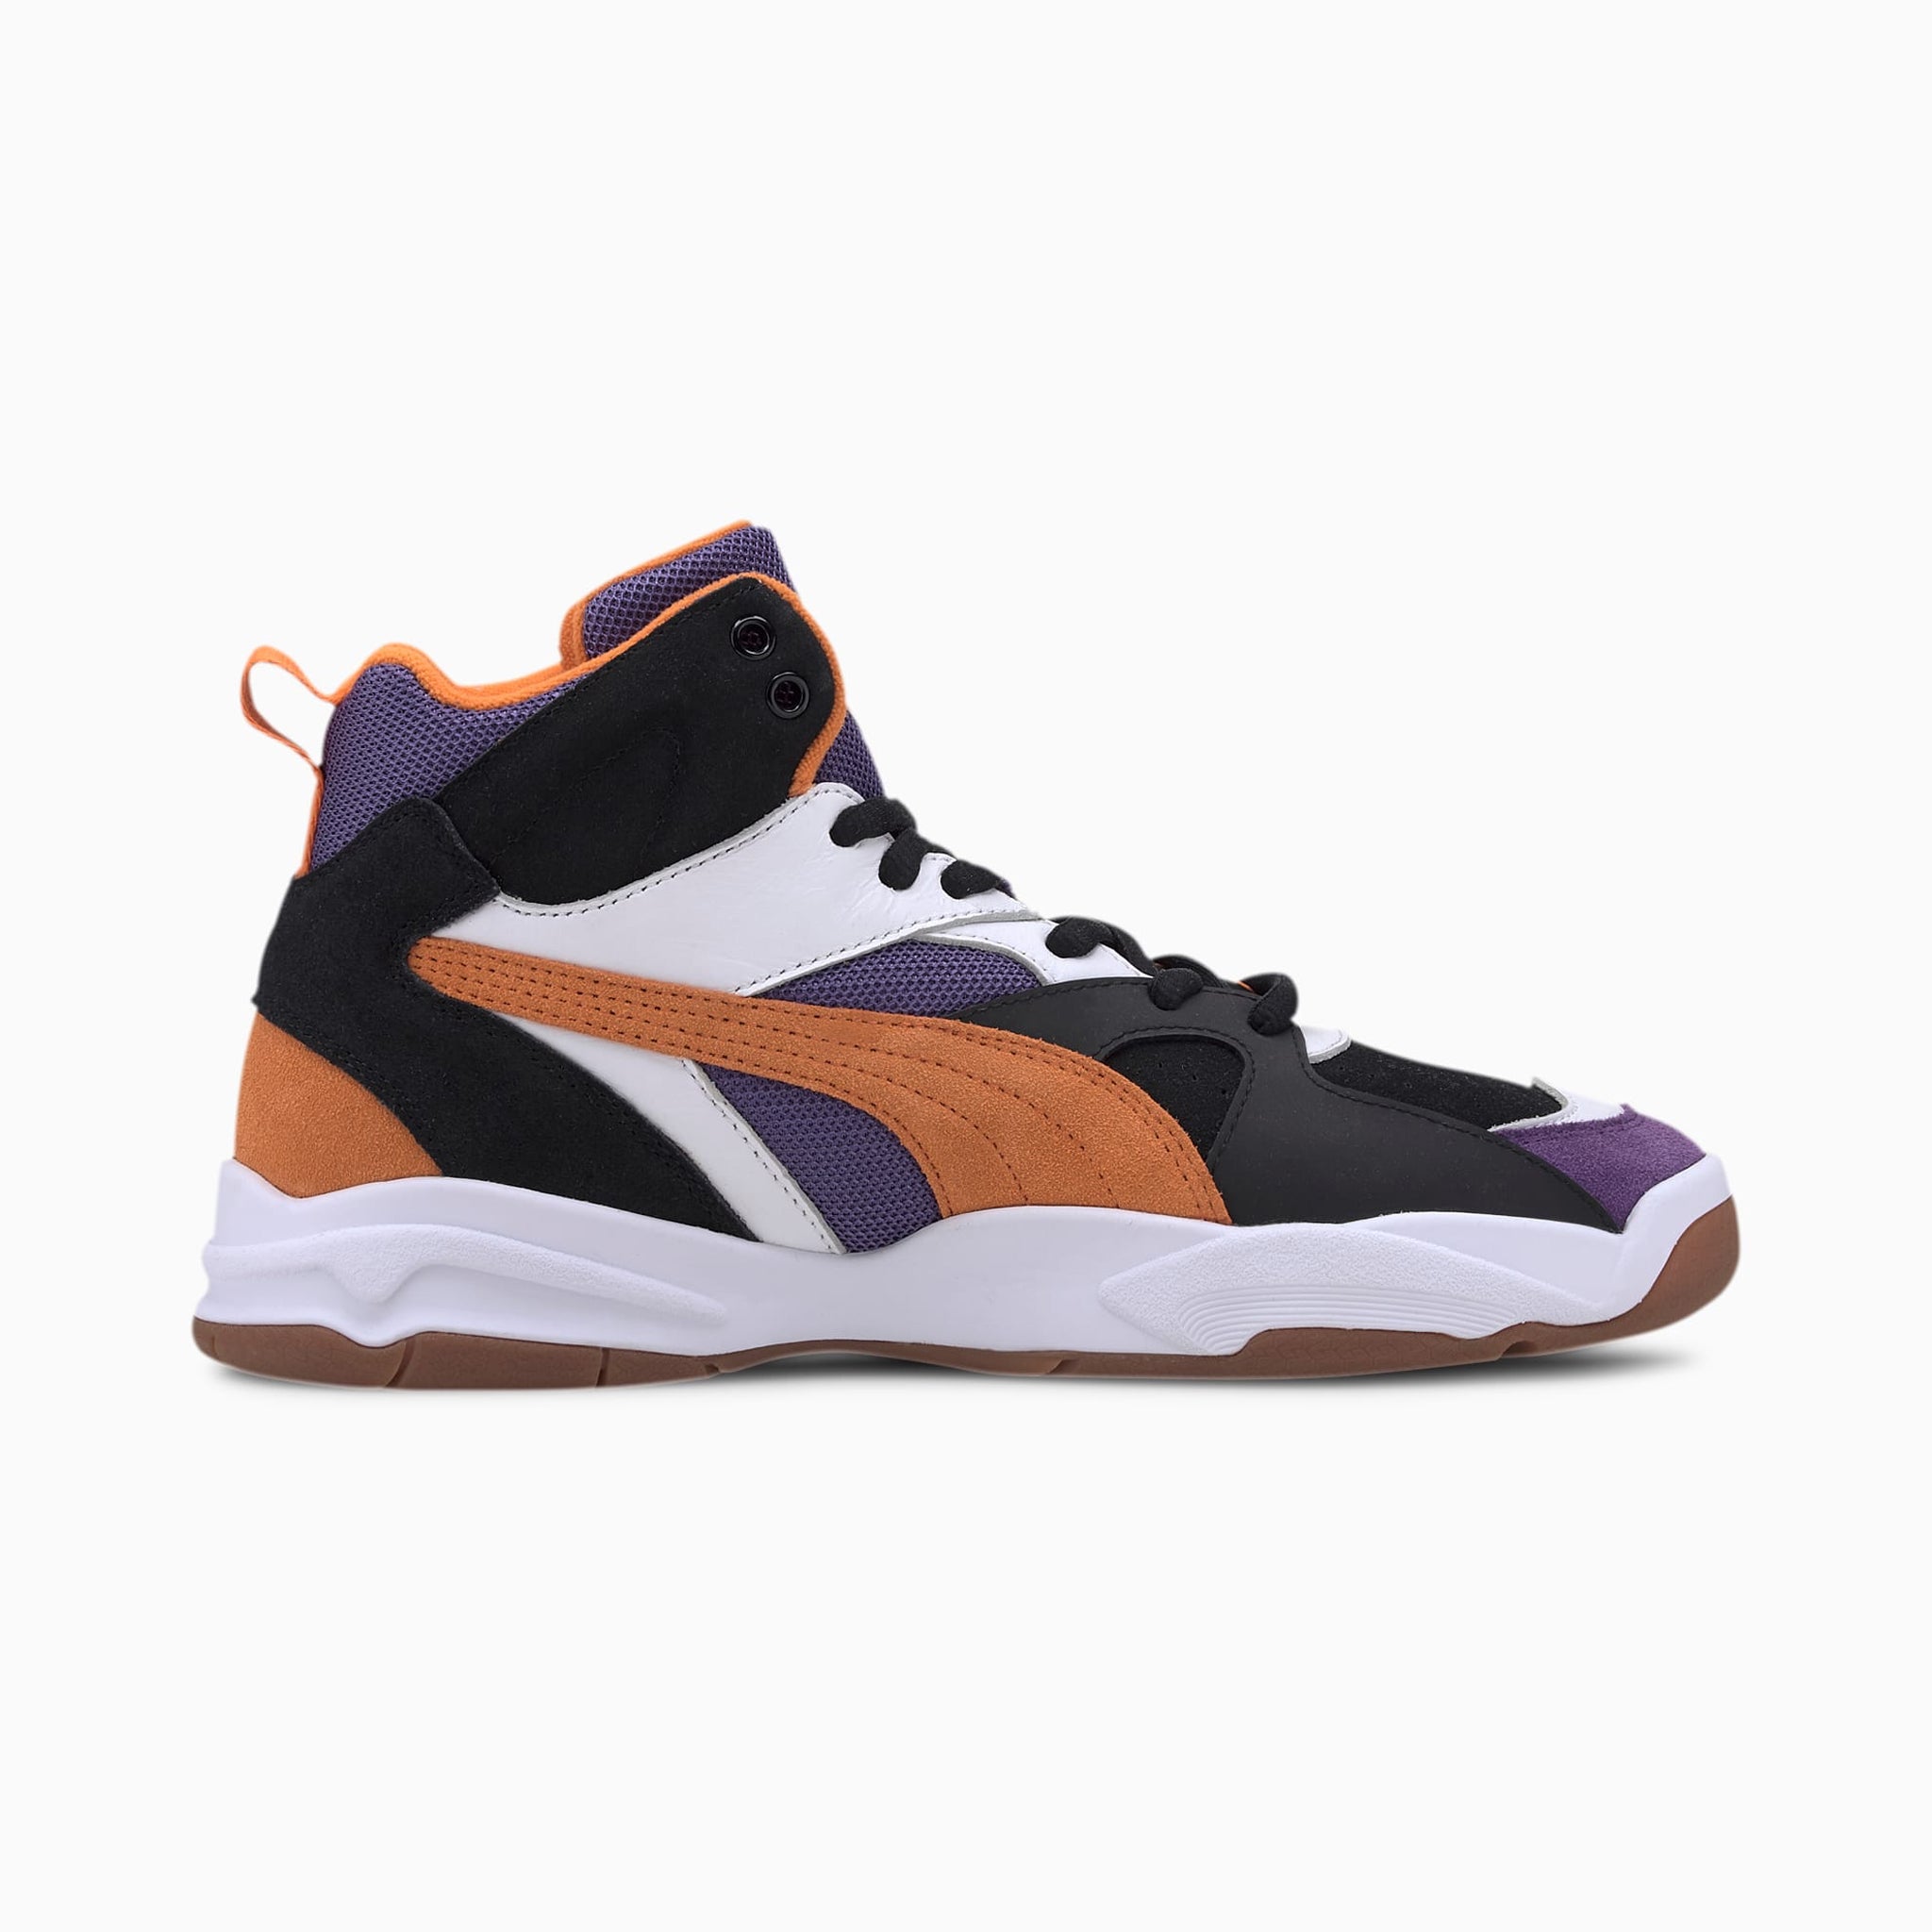 PUMA x THE HUNDREDS Performer Mid Sneakers – Capsul